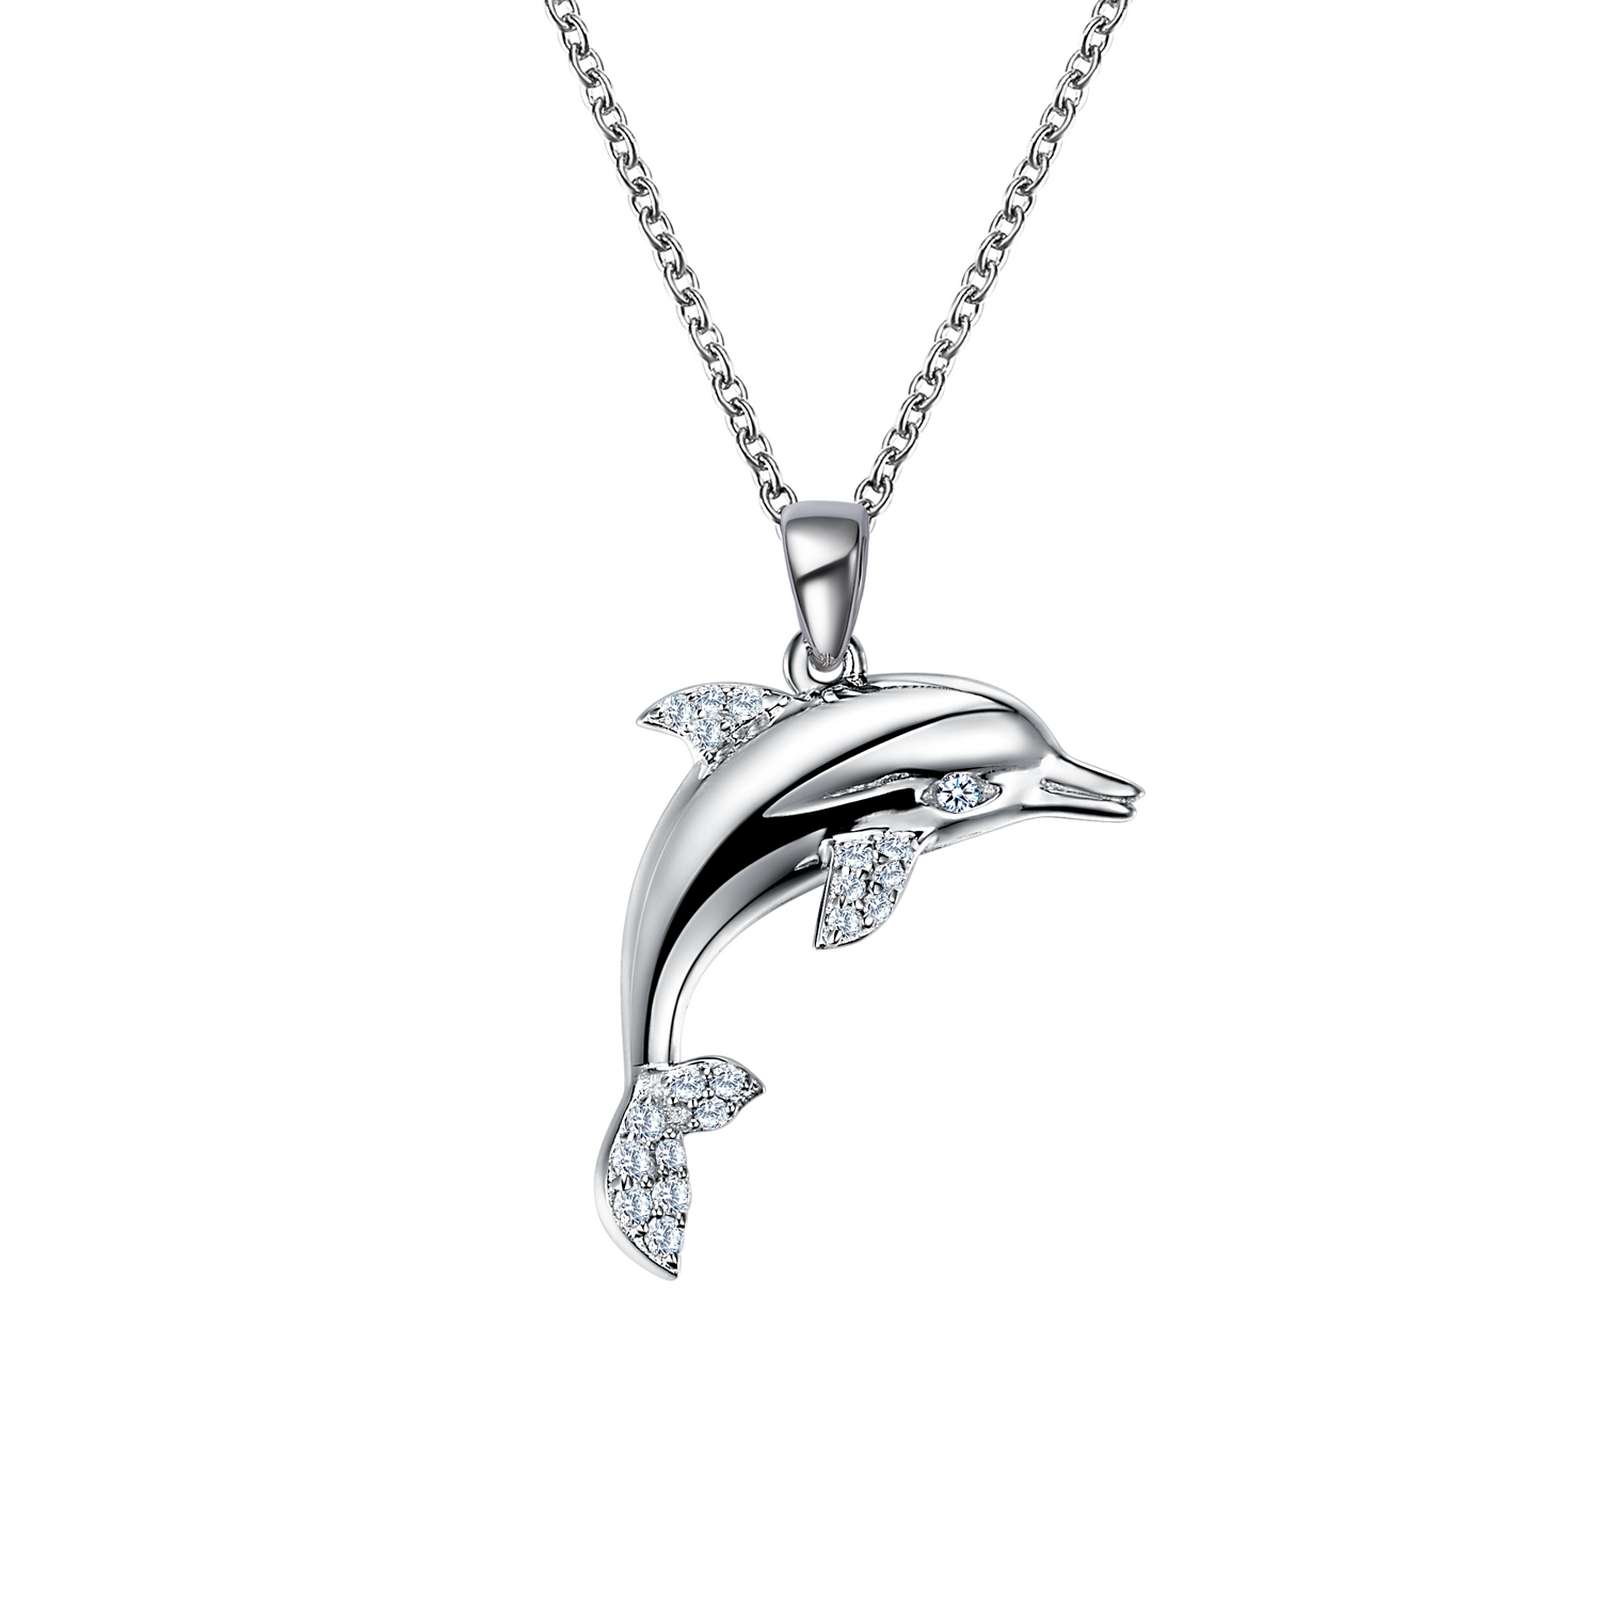 Leaping Dolphin Necklace Wood's Jewelers Mt. Pleasant, PA